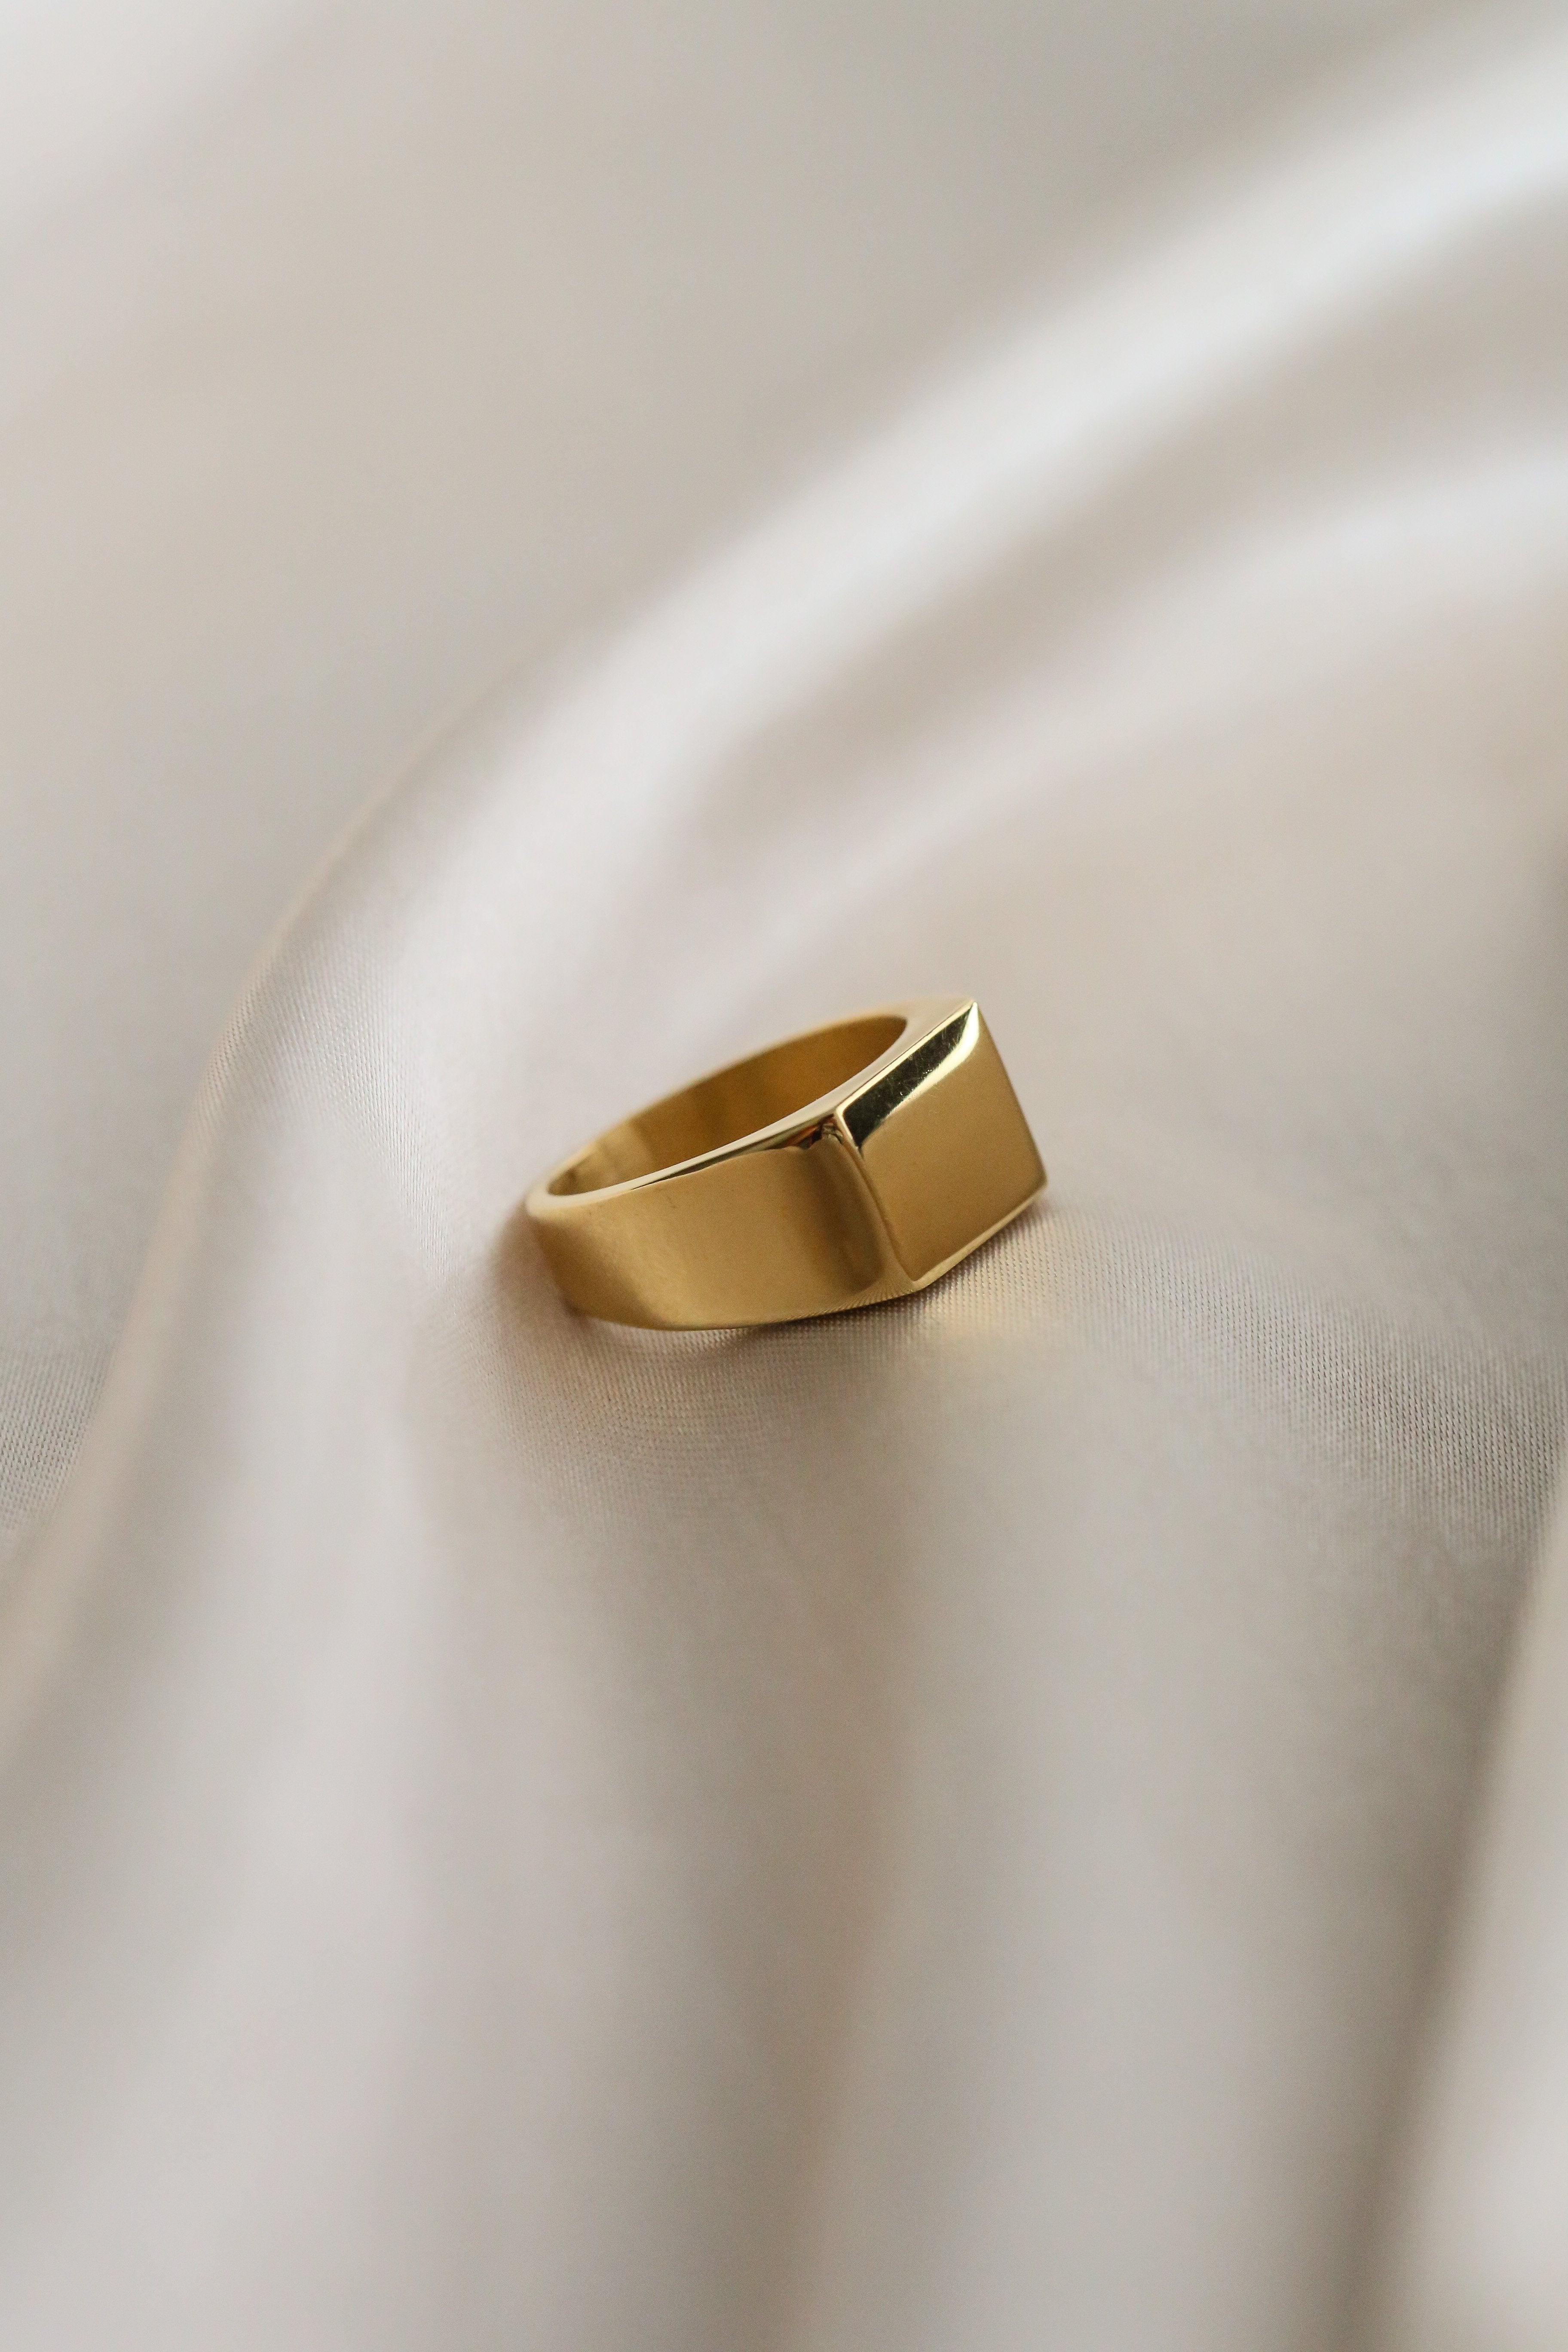 Anita Ring - Boutique Minimaliste has waterproof, durable, elegant and vintage inspired jewelry